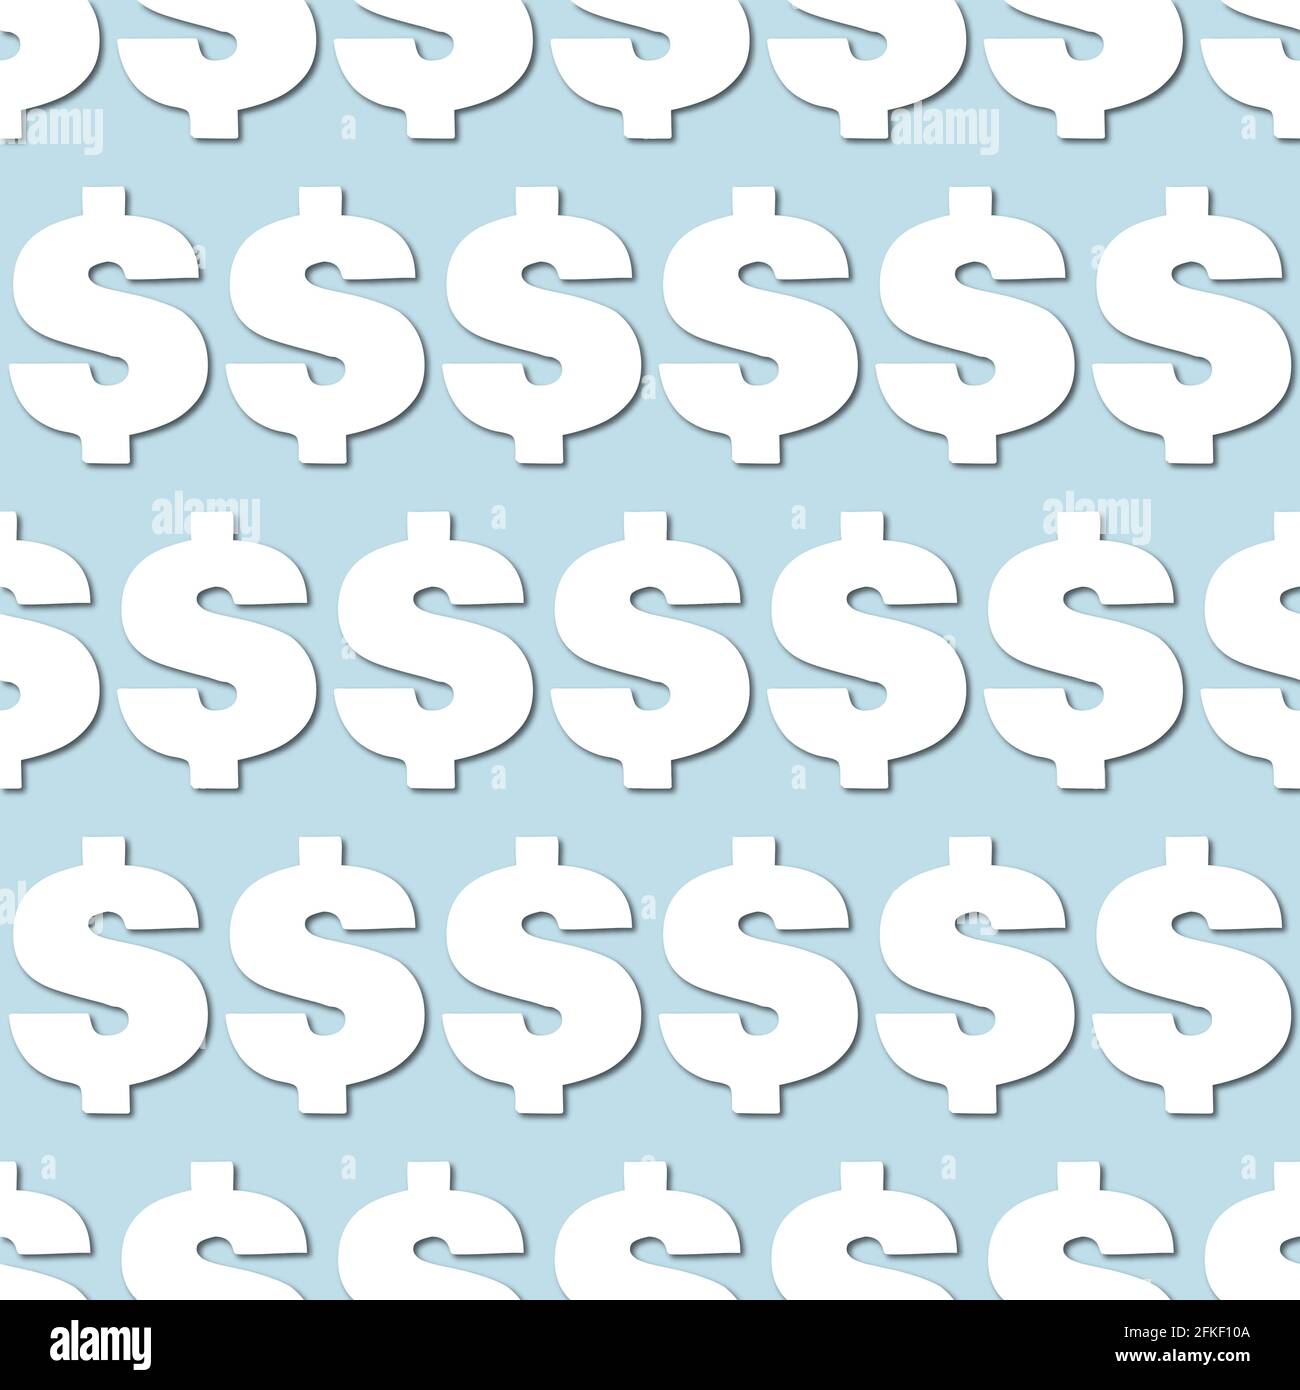 White american dollar silhouette on pale blue background, seamless pattern. Paper cut style with drop shadows and highlights. Stock Photo